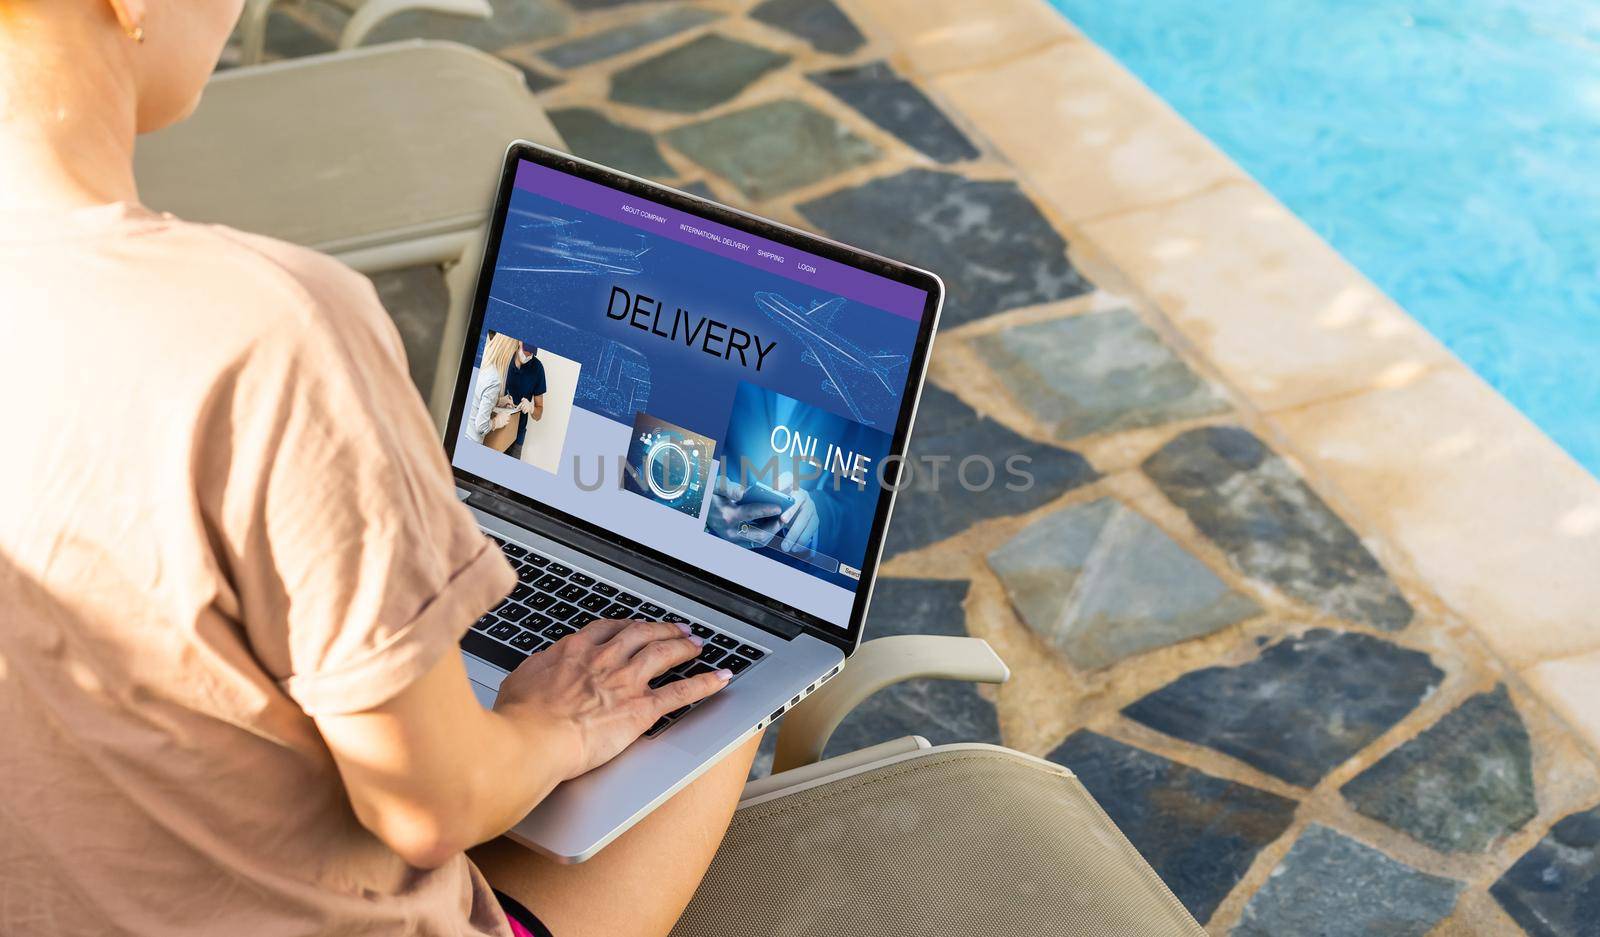 delivery icon on laptop keyboard. Online shopping, ecommerce and retail sale concept, delivery for customers ordering things from retailers websites using internet.